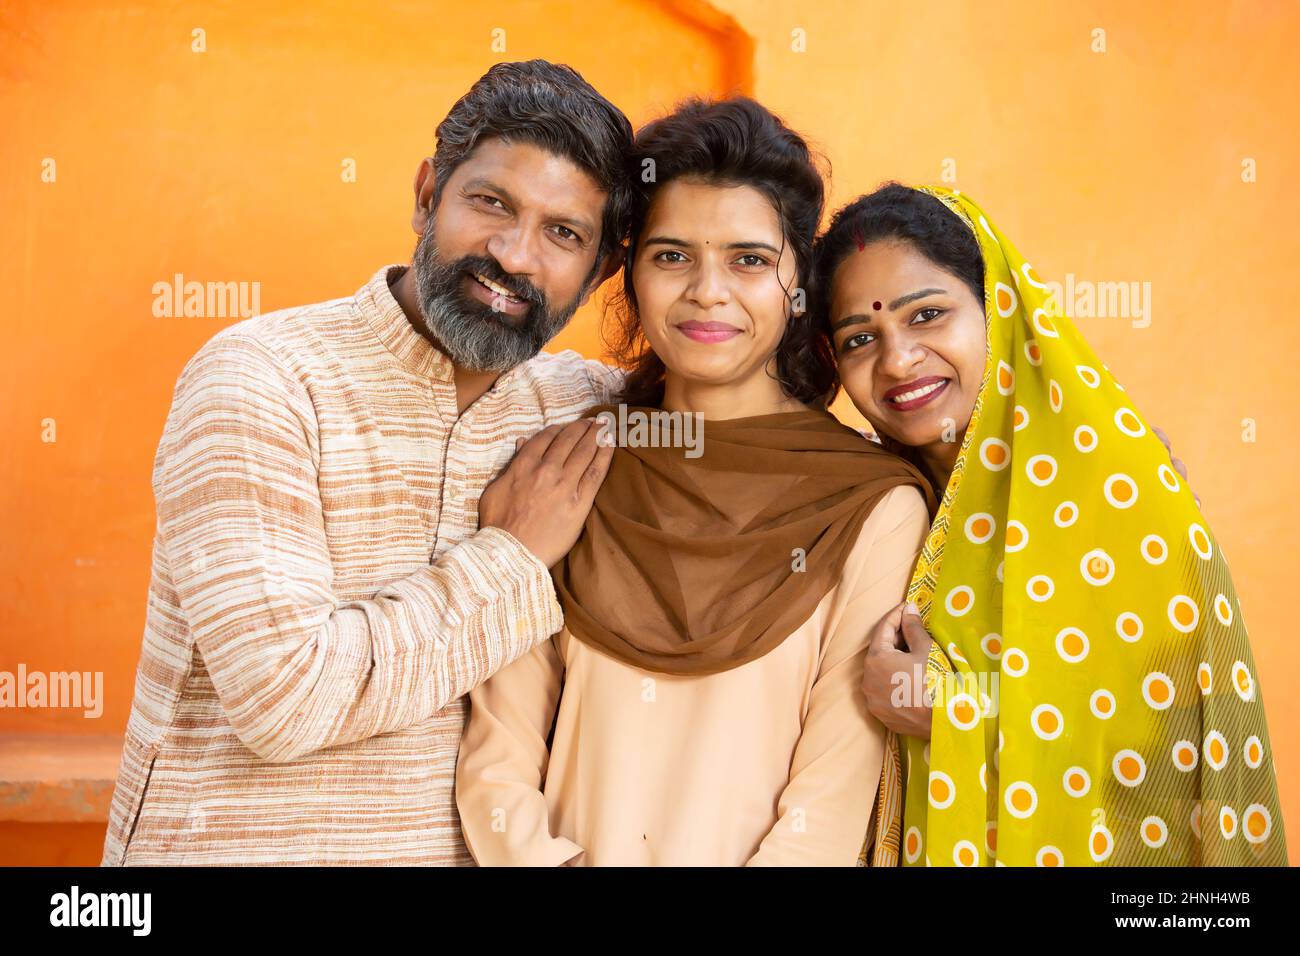 Portrait of happy rural Indian family, young girl in school uniform with her parents, Beard man and woman in sari standing with daughter. looking at c Stock Photo